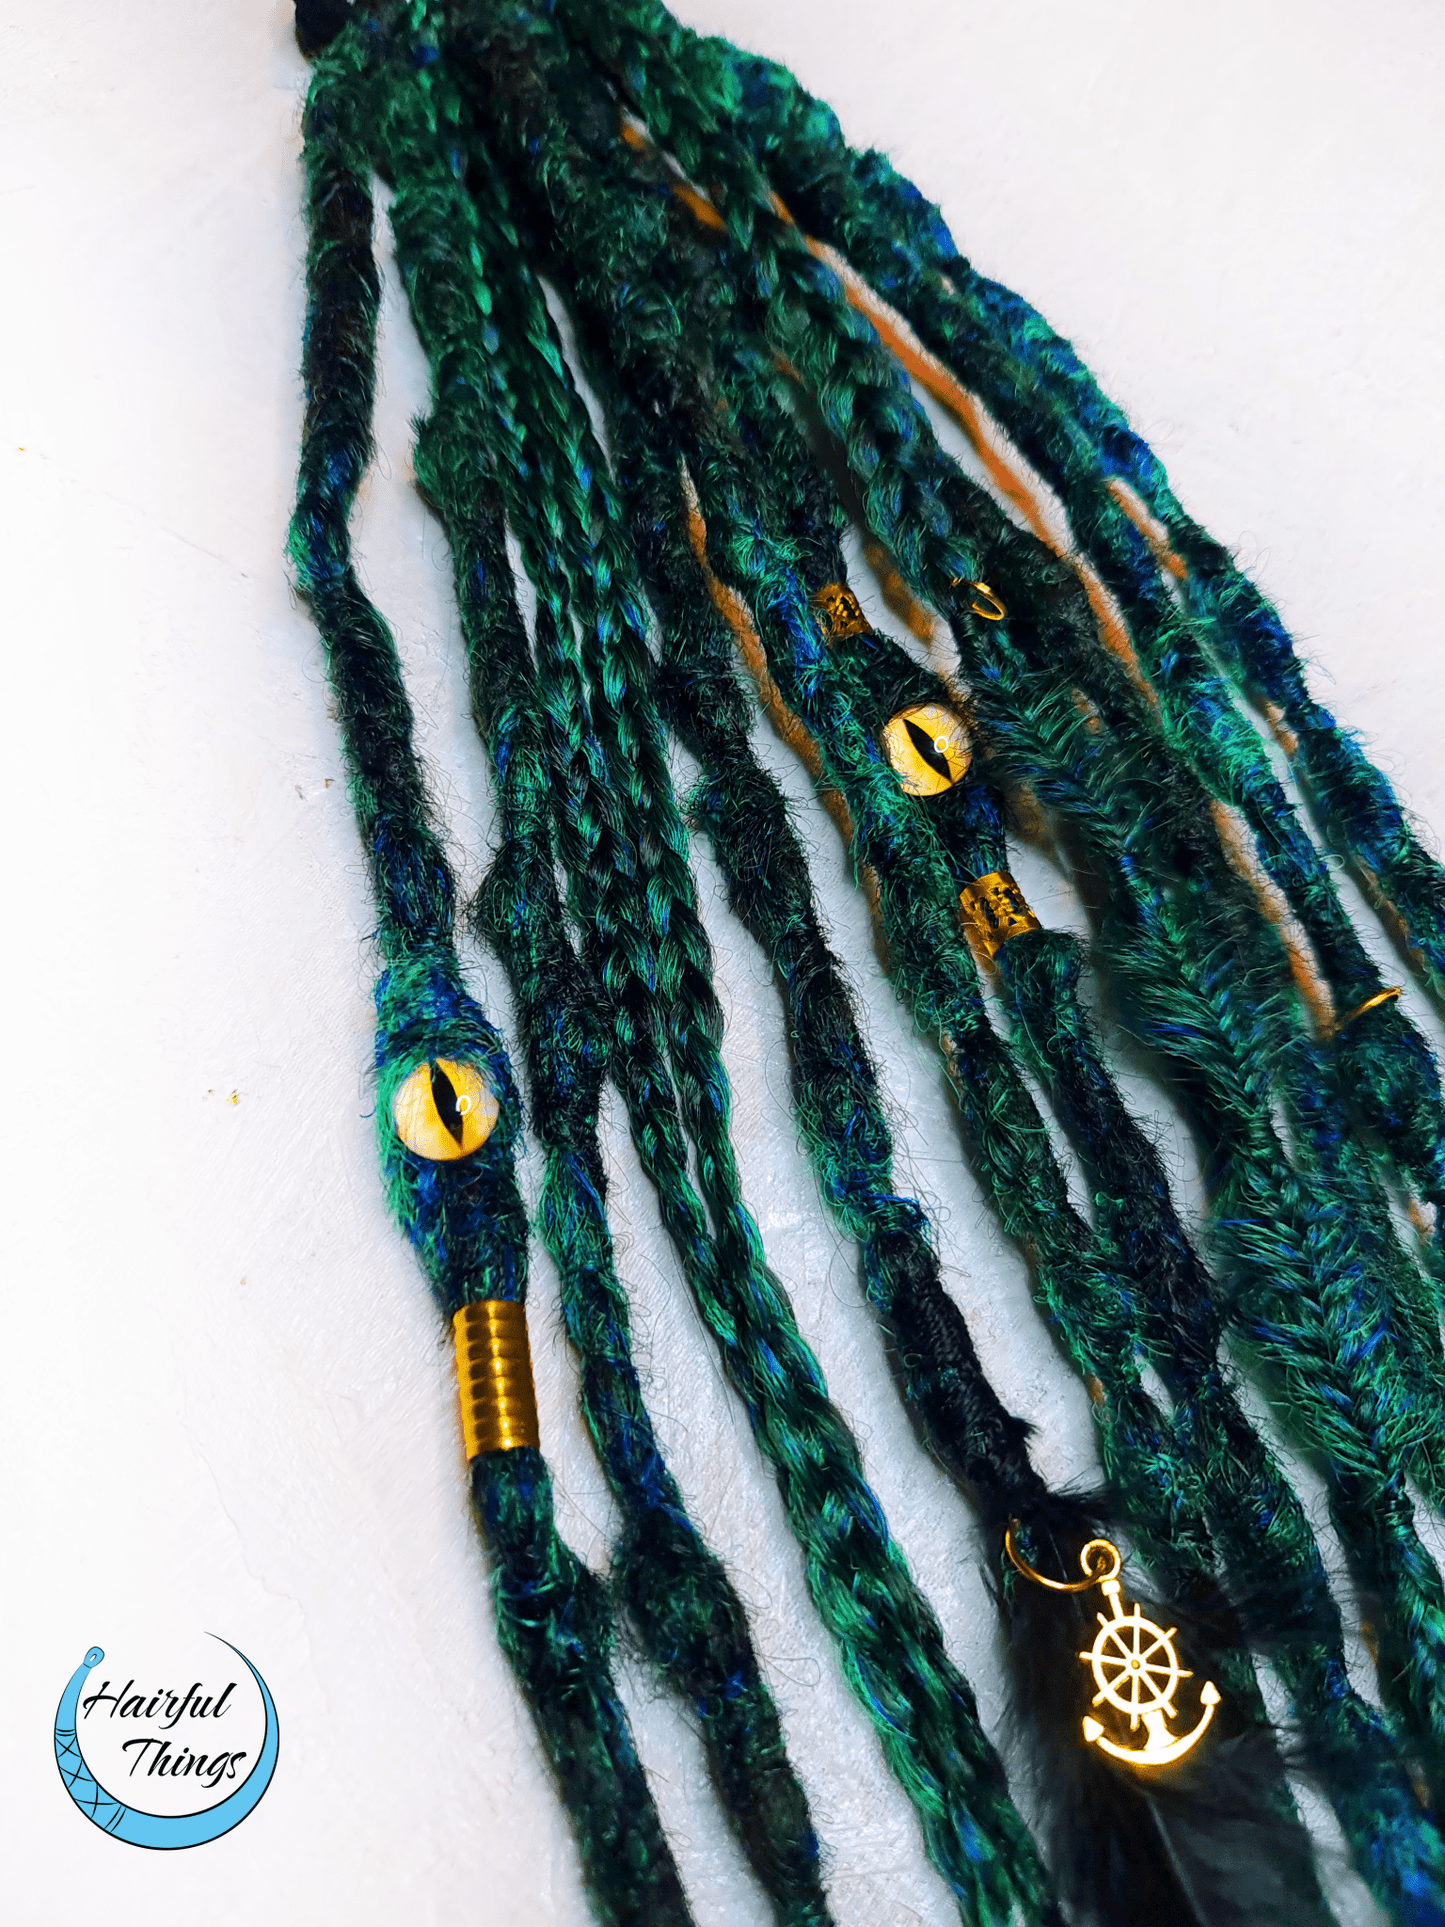 Green afro-elastic with textured dreads and box braids – Hairful